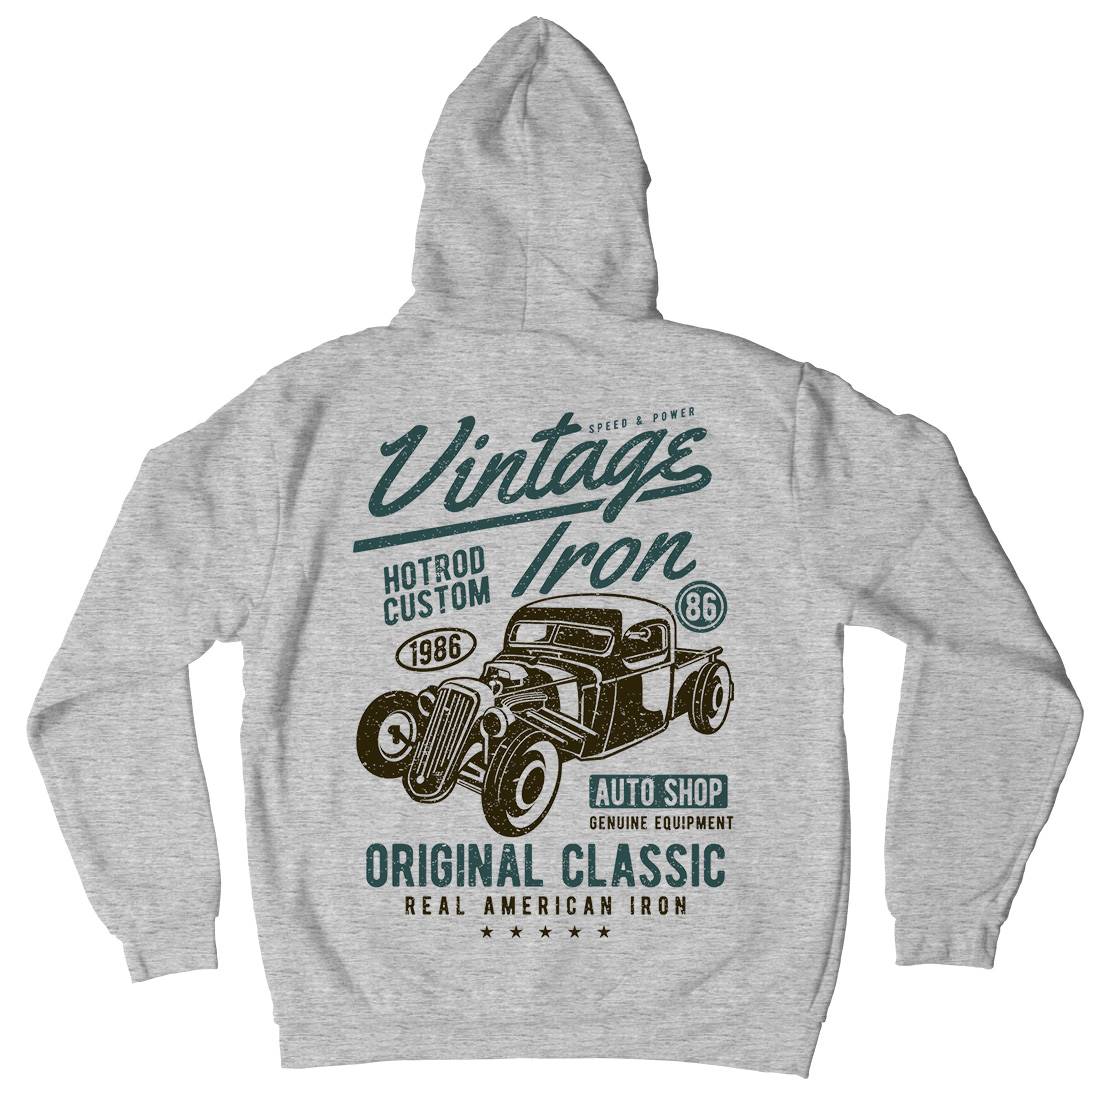 Vintage Iron Mens Hoodie With Pocket Cars A192